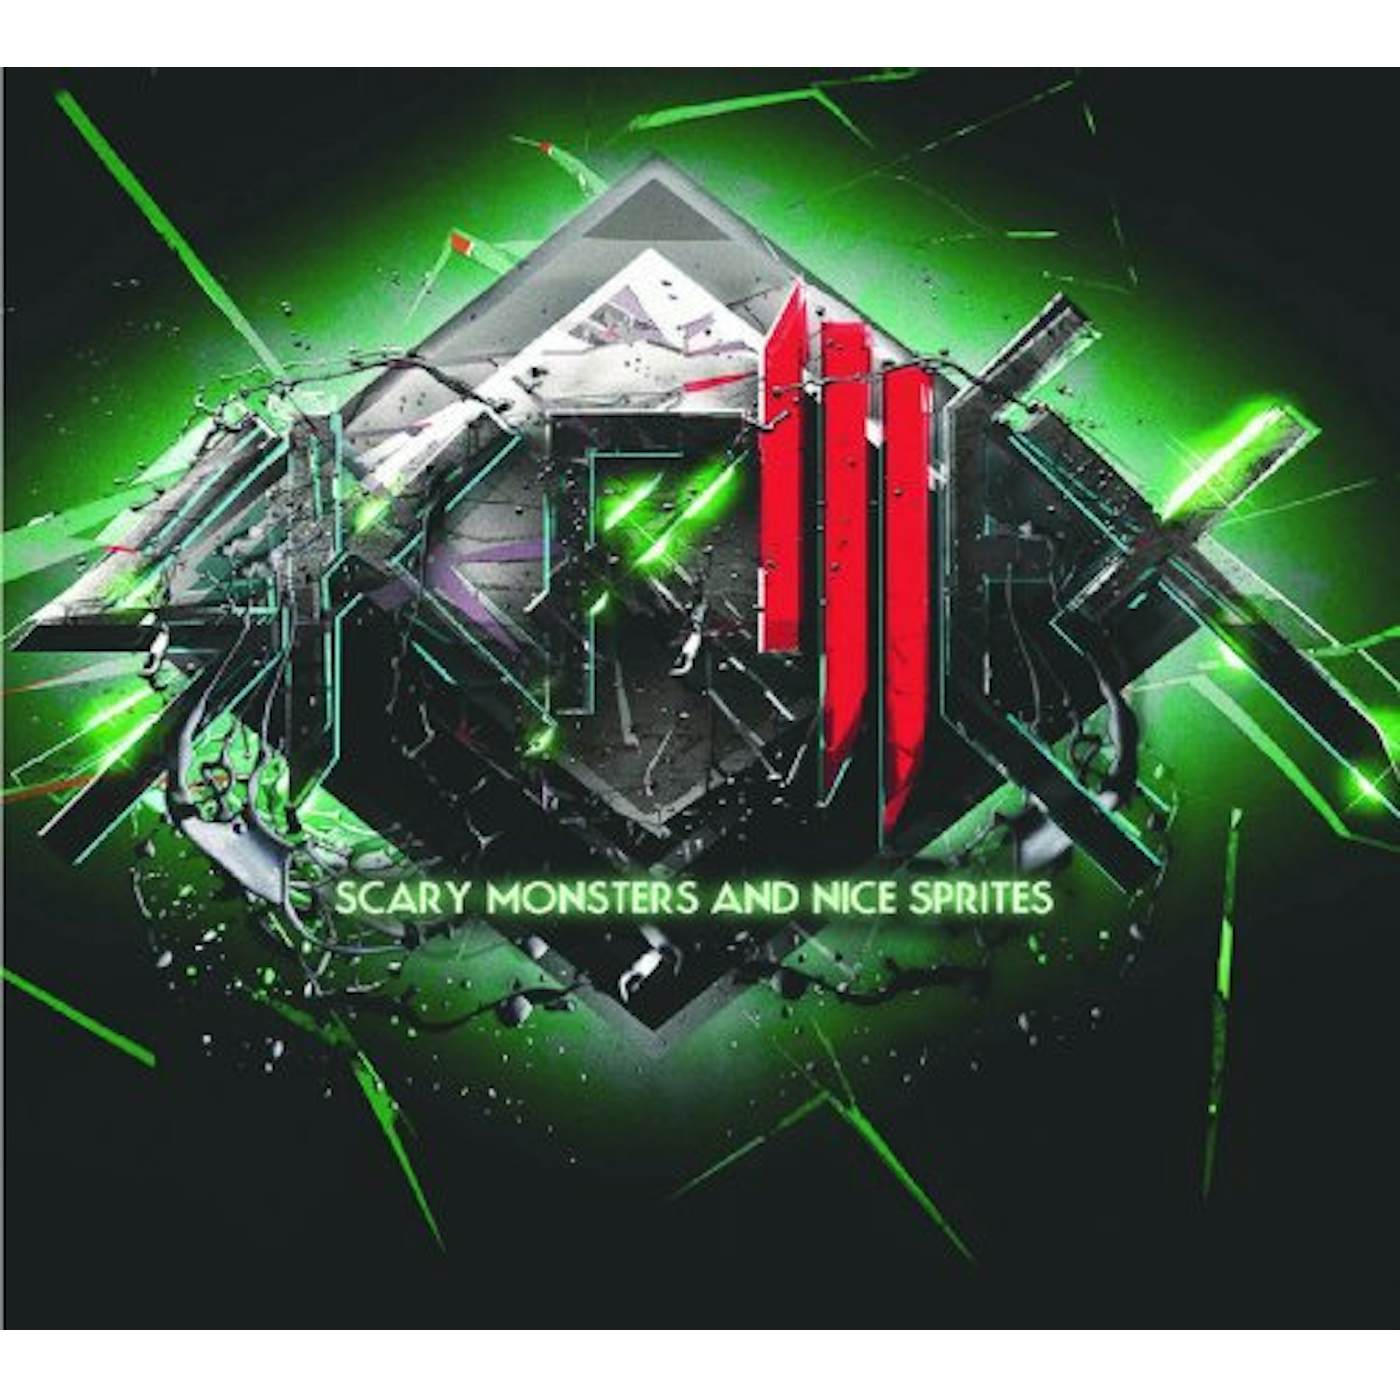 Skrillex Scary Monsters And Nice Sprites Vinyl Record